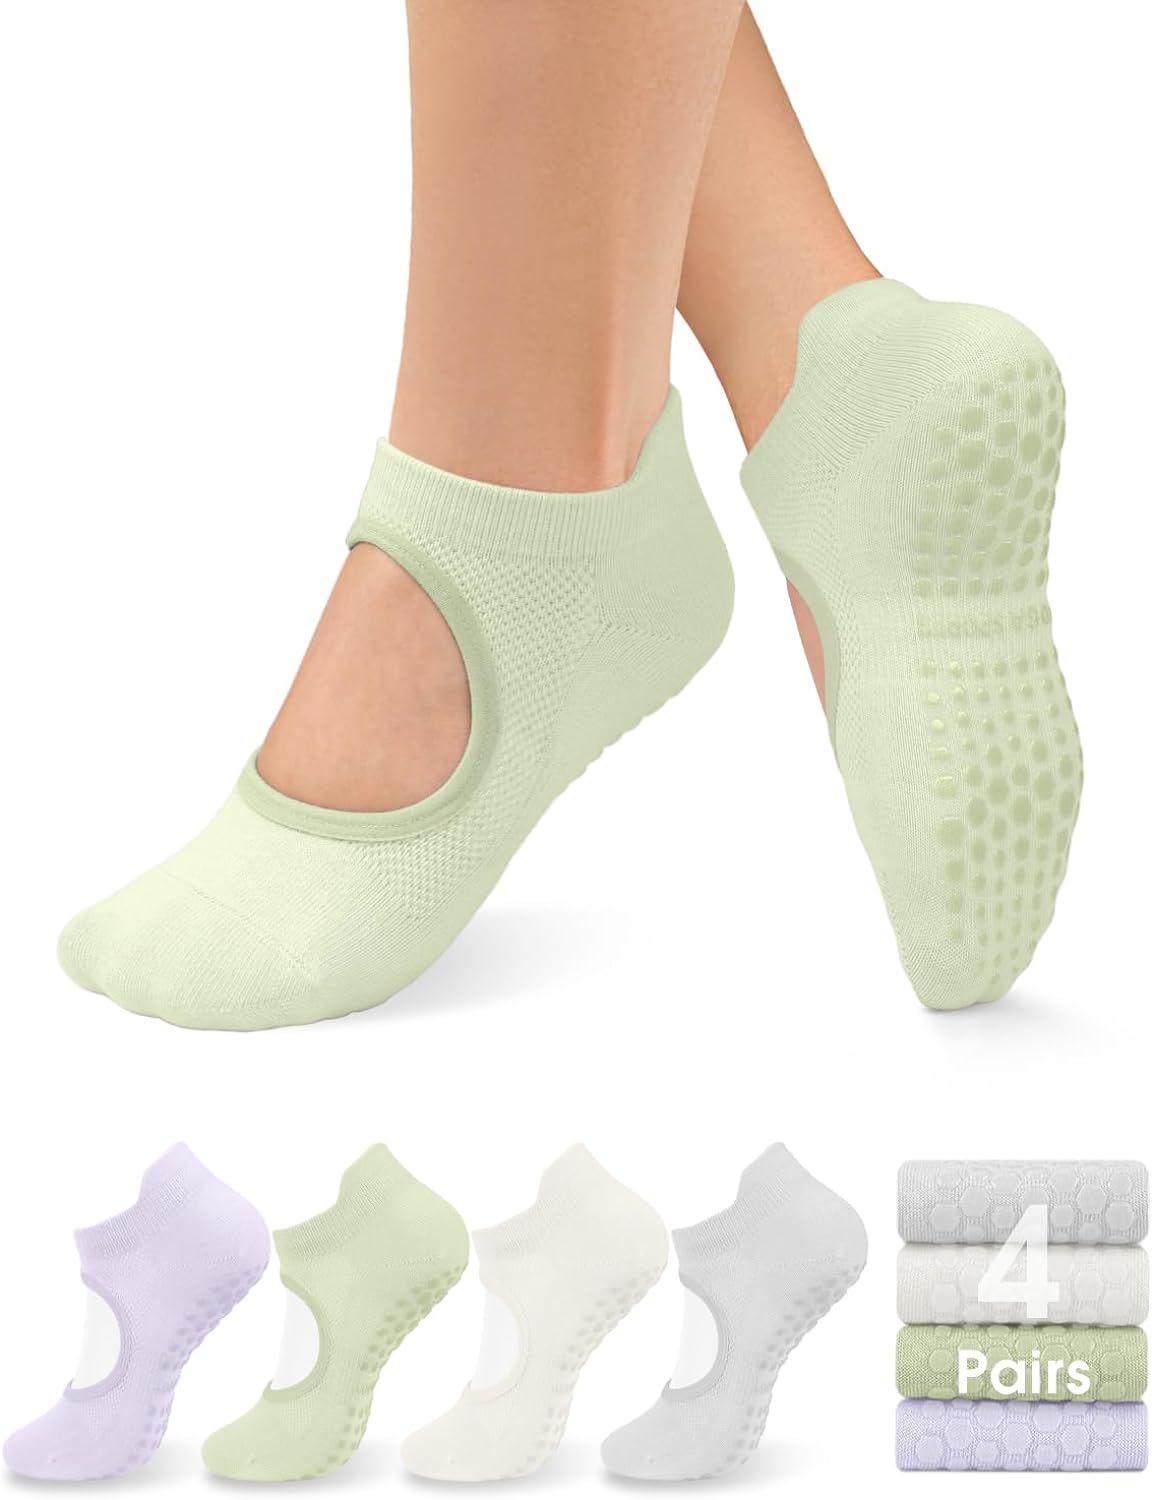 yeuG Grip Socks for Women Pilates Socks with Grips Open Top Non